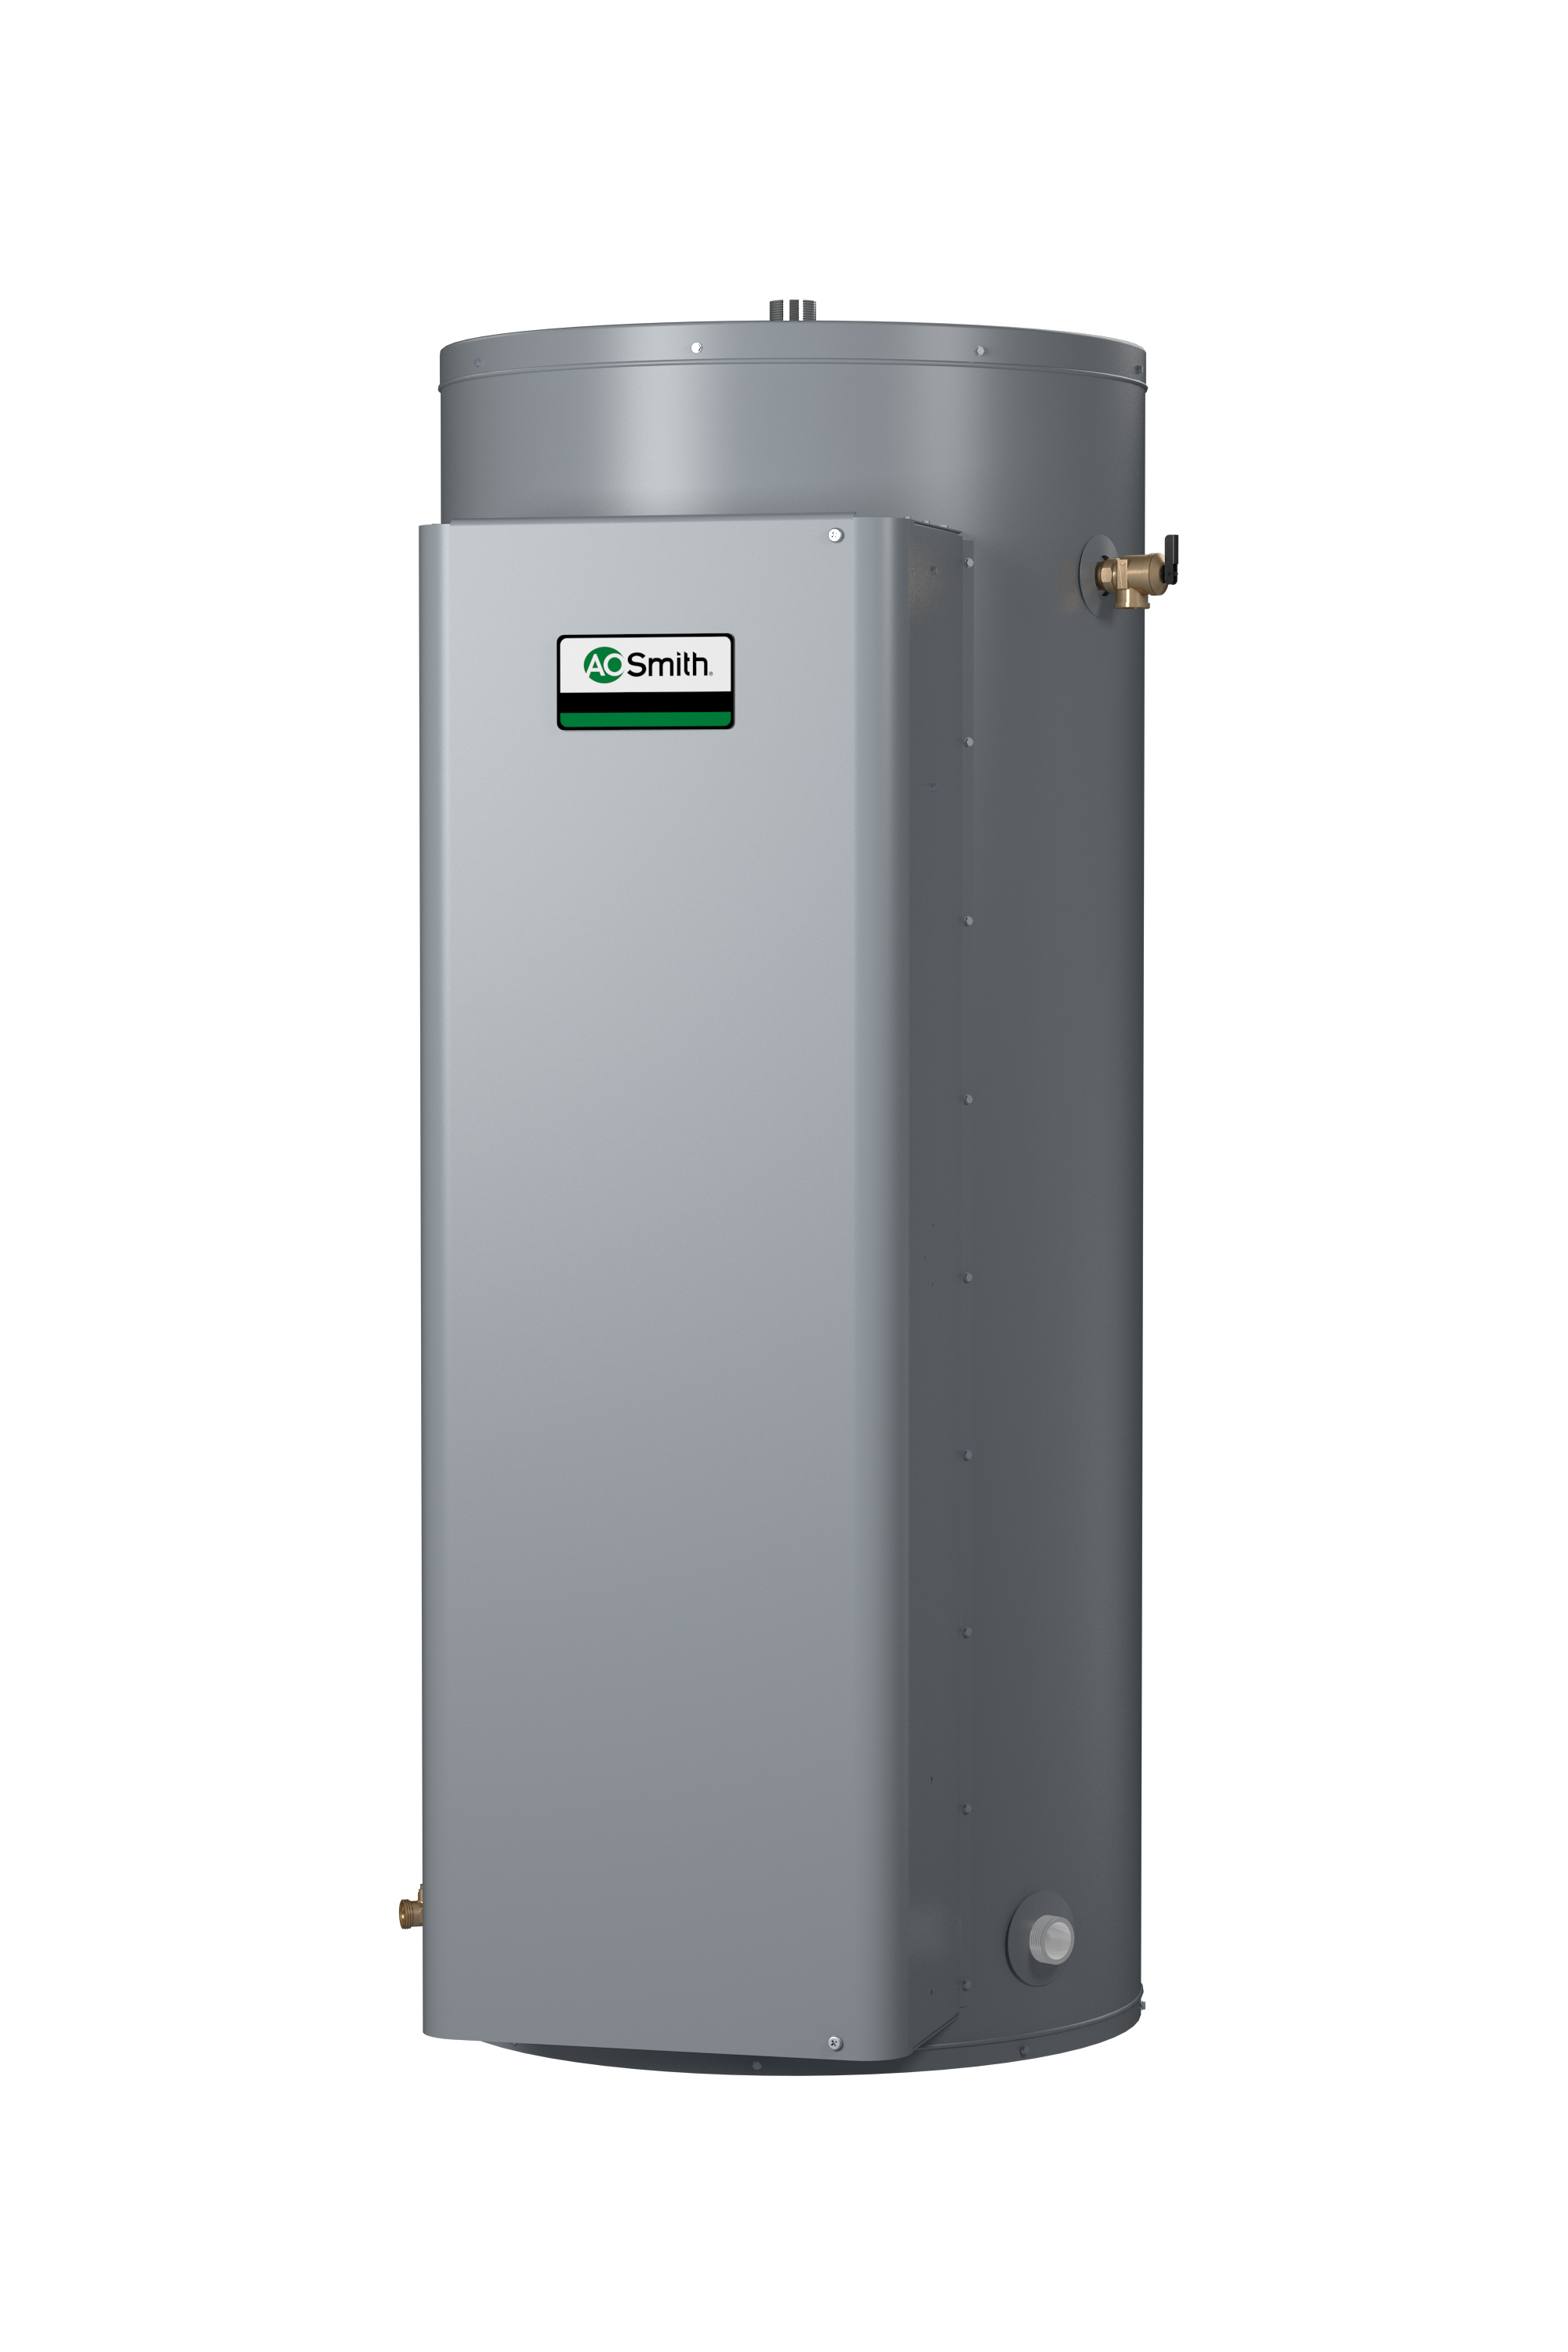 AO SMITH DRE-120-27, 119 GALLON, 27.0KW, 240 VOLT, 112.5 AMPS, 1 PHASE, 6 ELEMENT, COMMERCIAL ELECTRIC WATER HEATER, GOLD SERIES